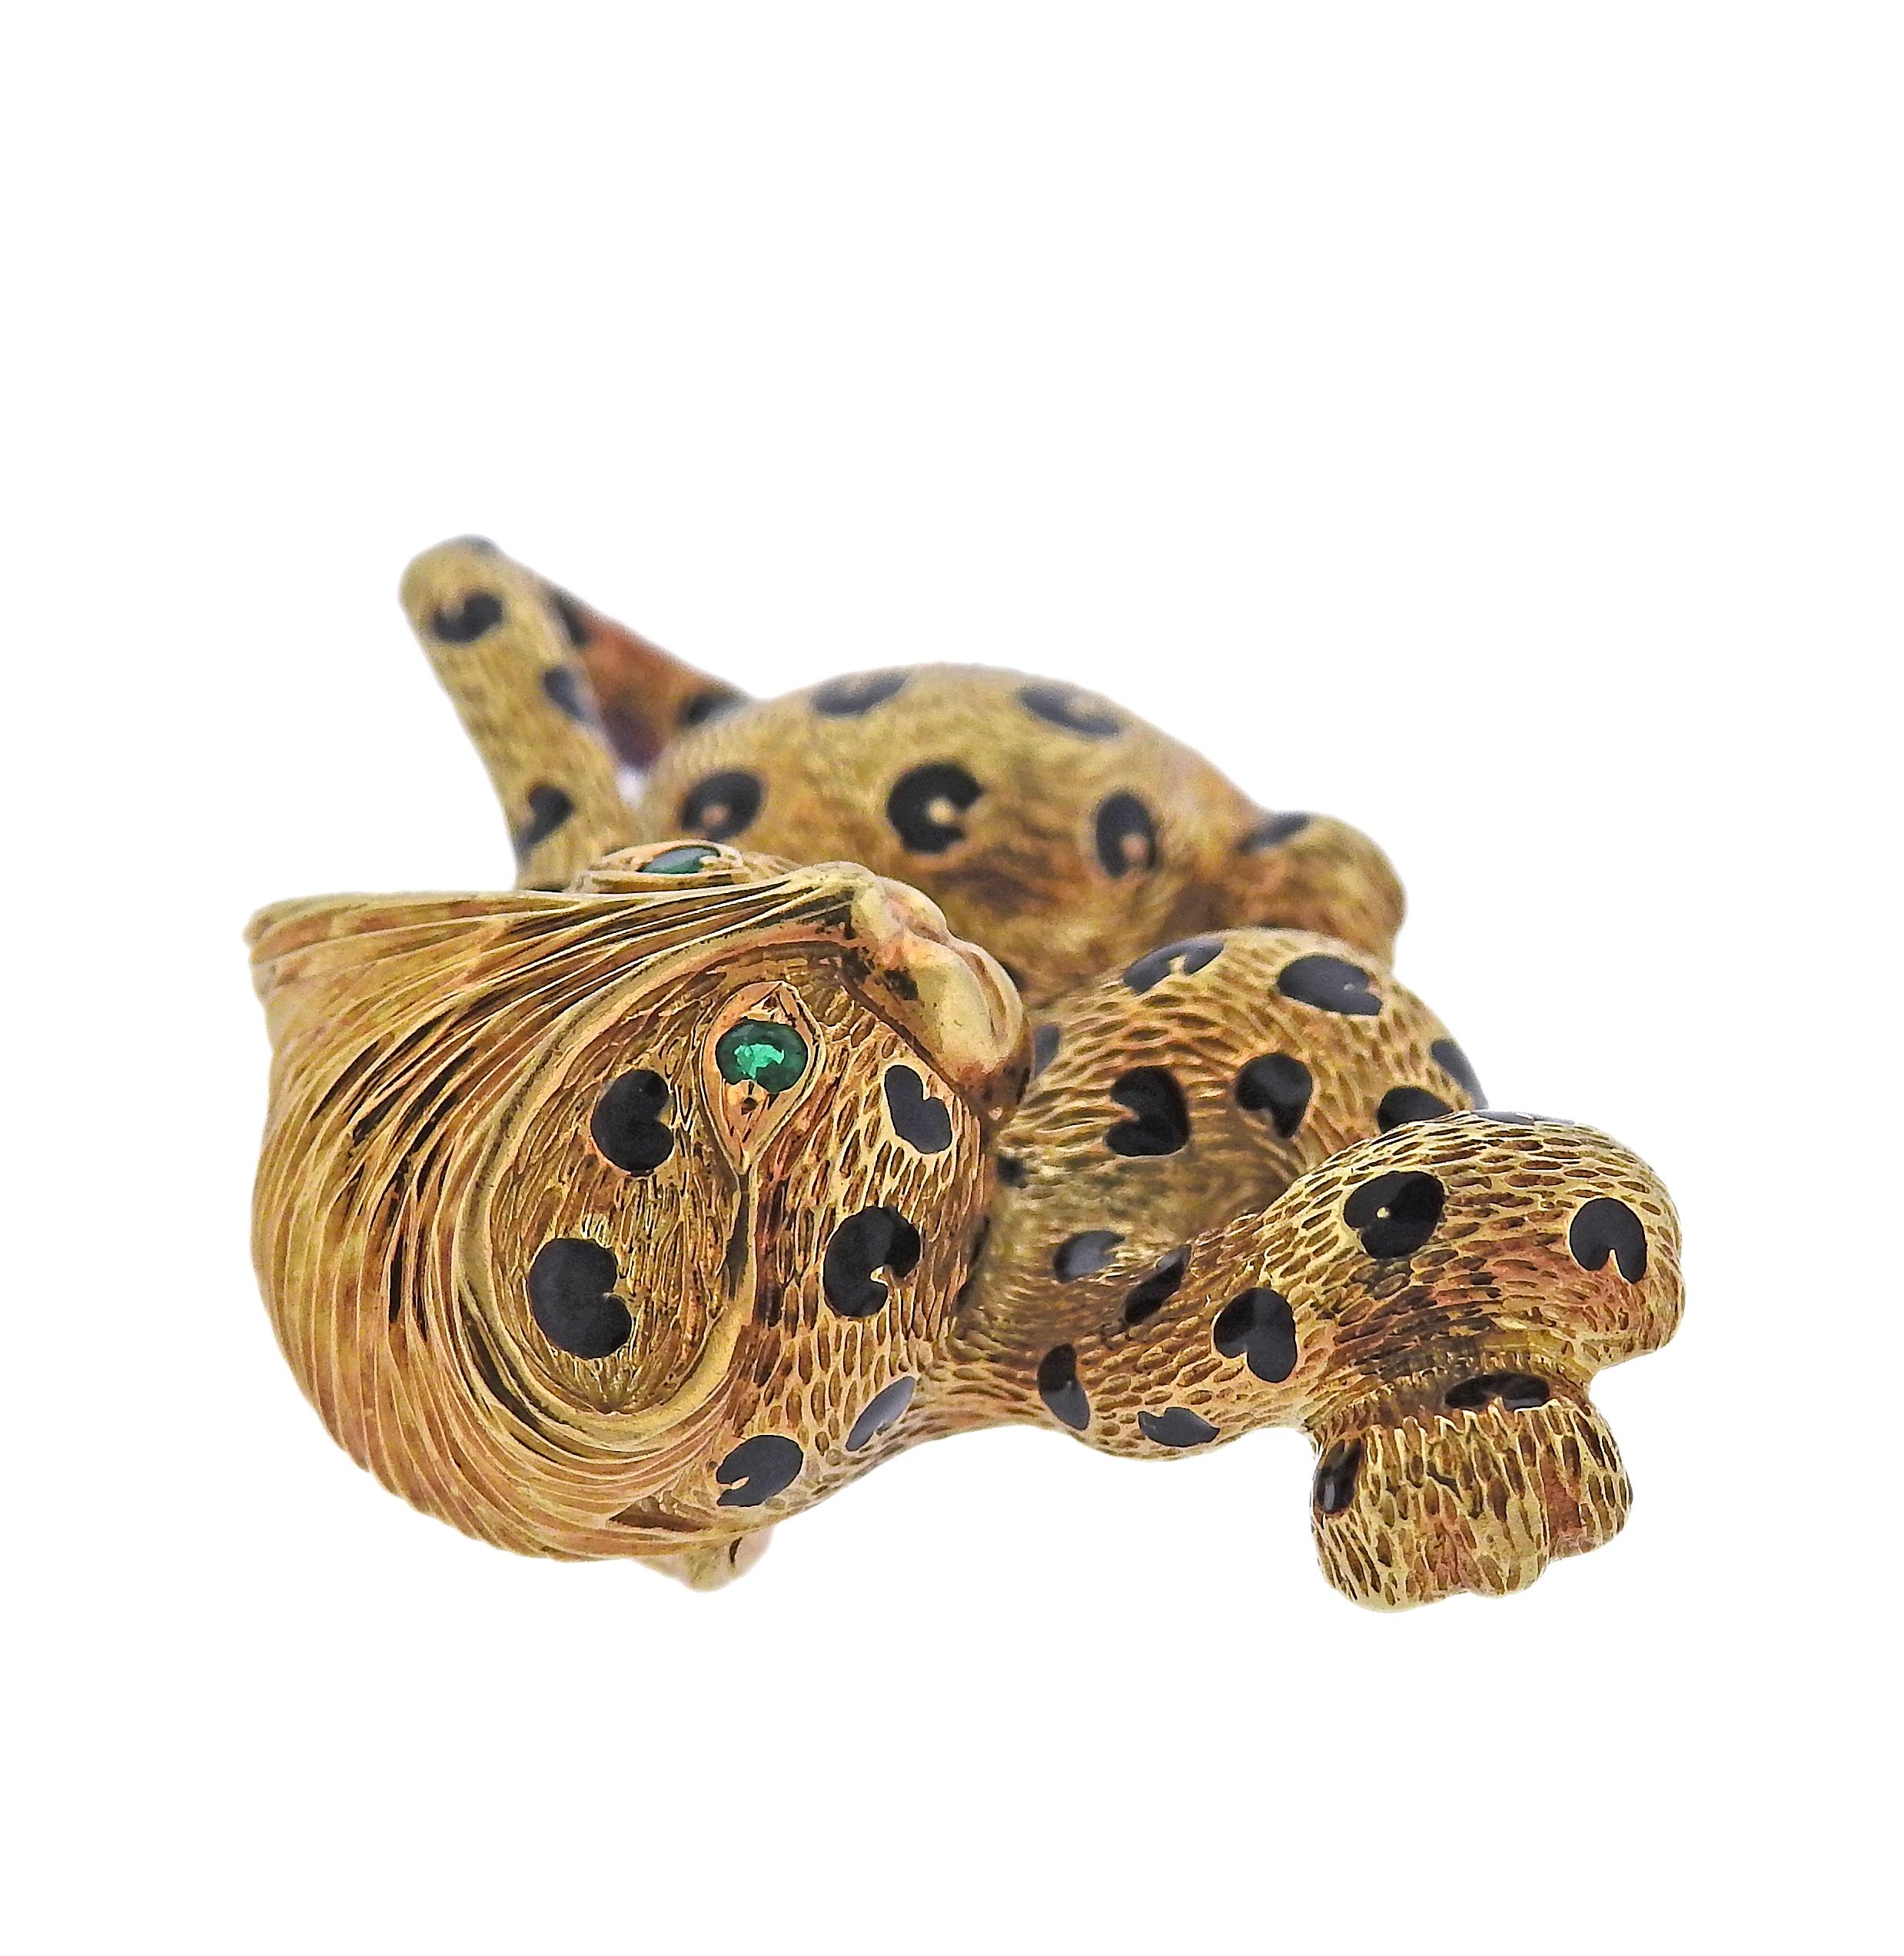 French made 18k yellow gold brooch of leopard featuring enamel and emerald eyes. Brooch is 45mm x 25mm. Marked 750 made in France. Weight is 17 grams. 